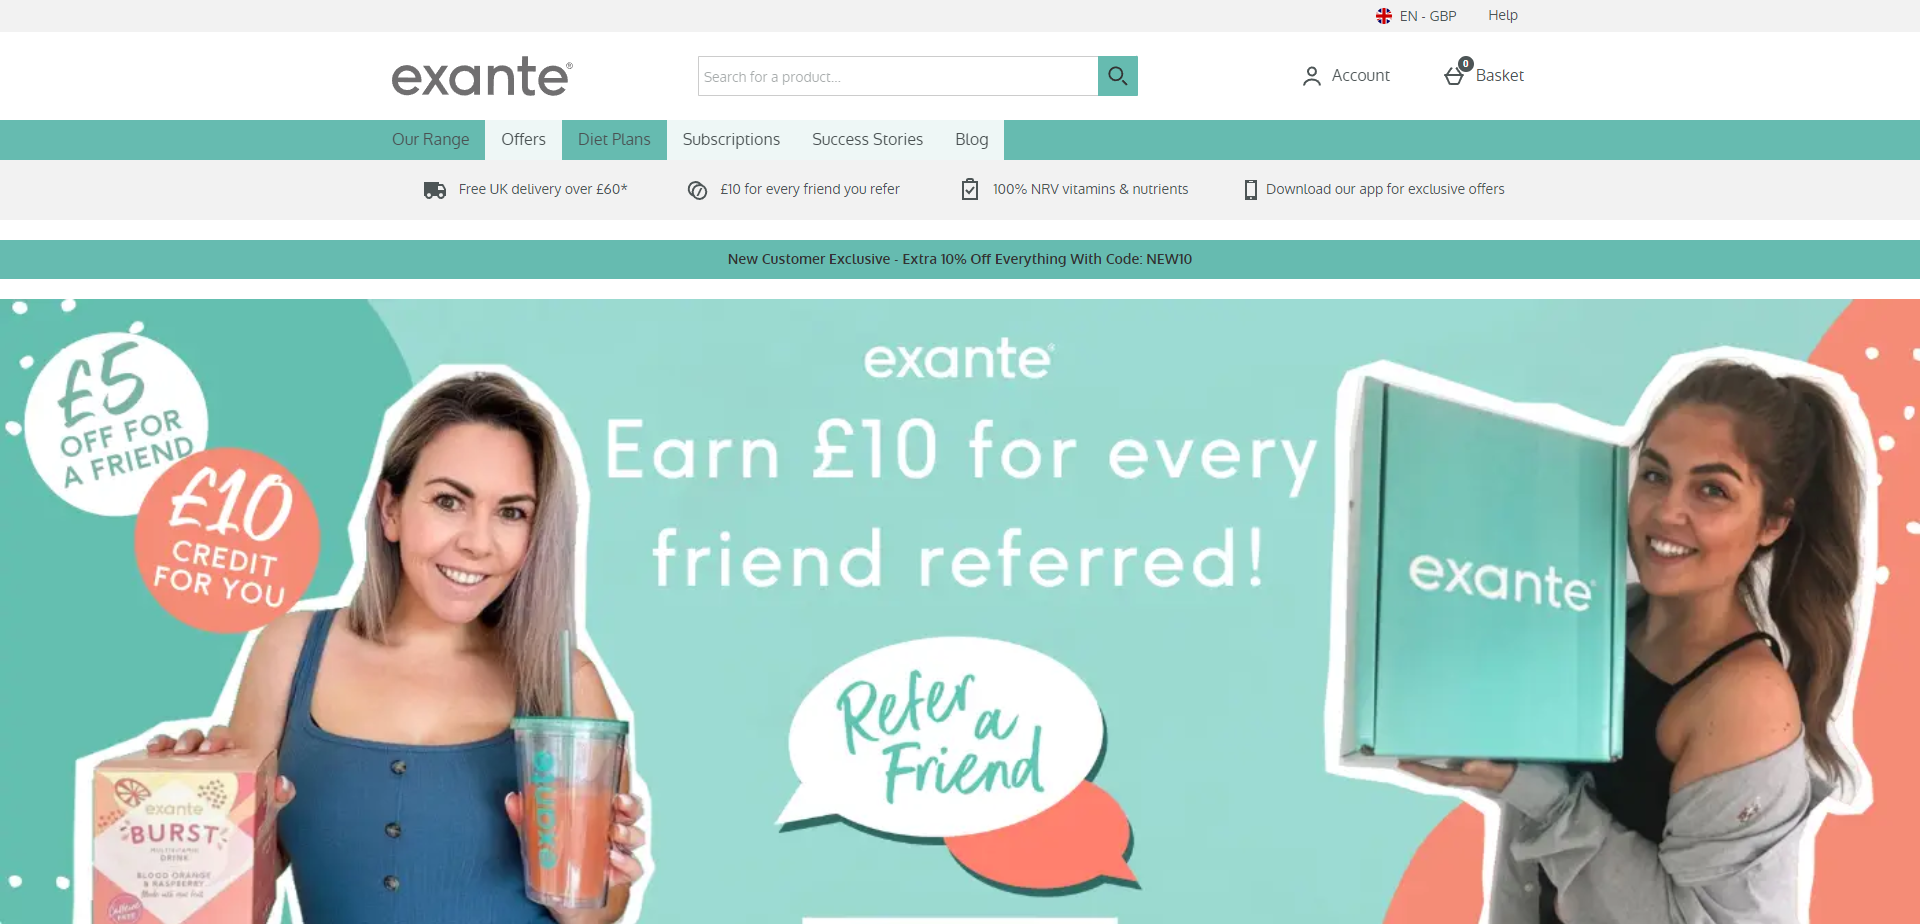 Referral Landing Page for Extante Diet